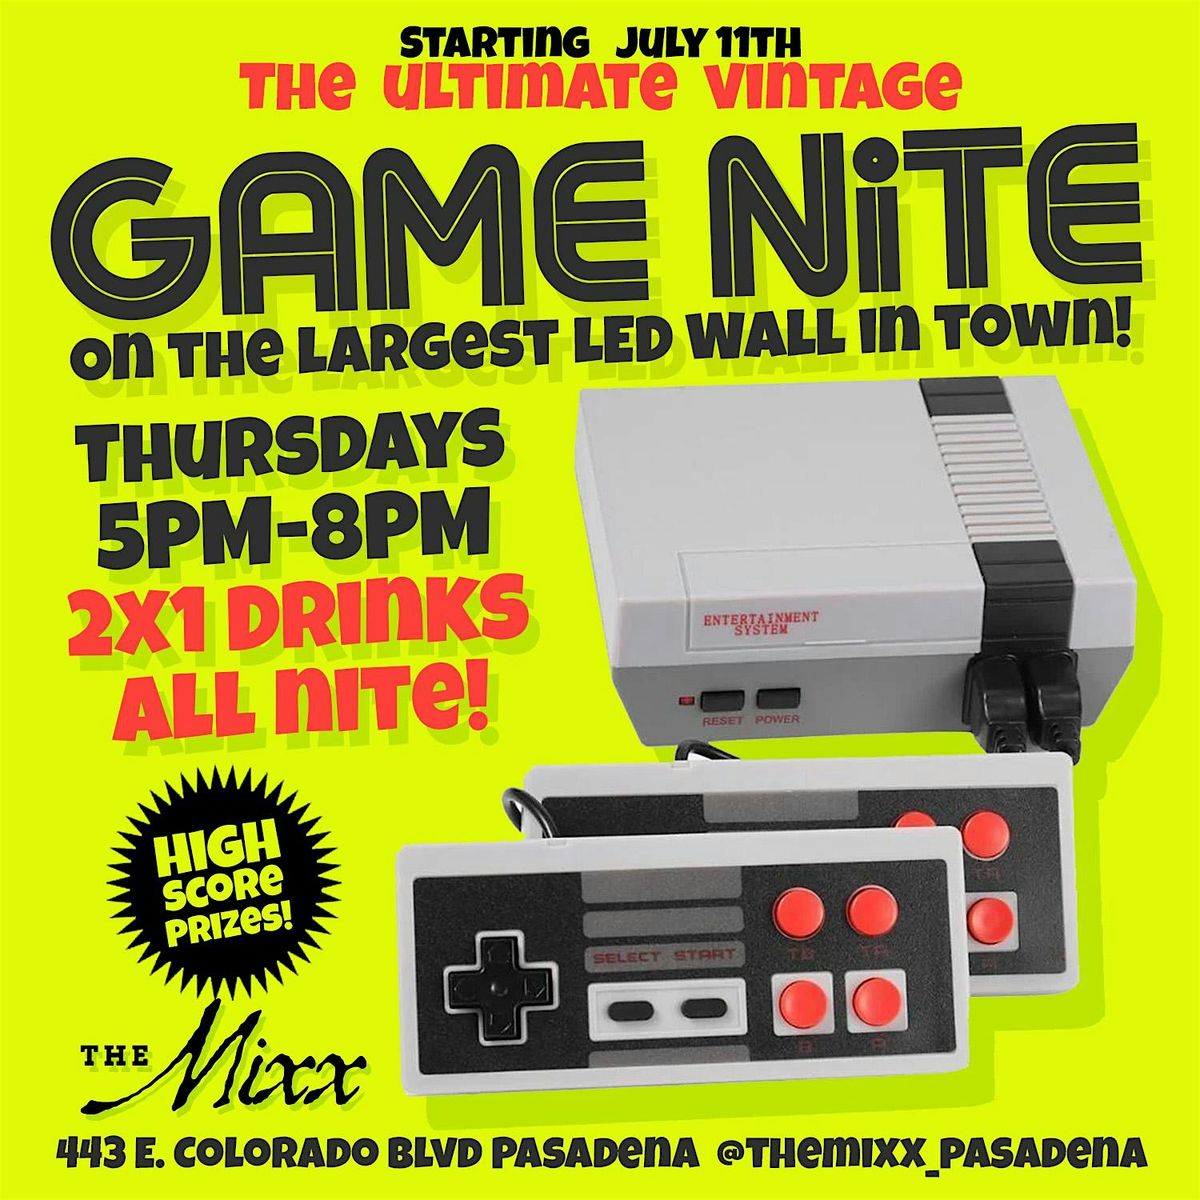 THE ULTIMATE VINTAGE GAME NITE & Happy Hours